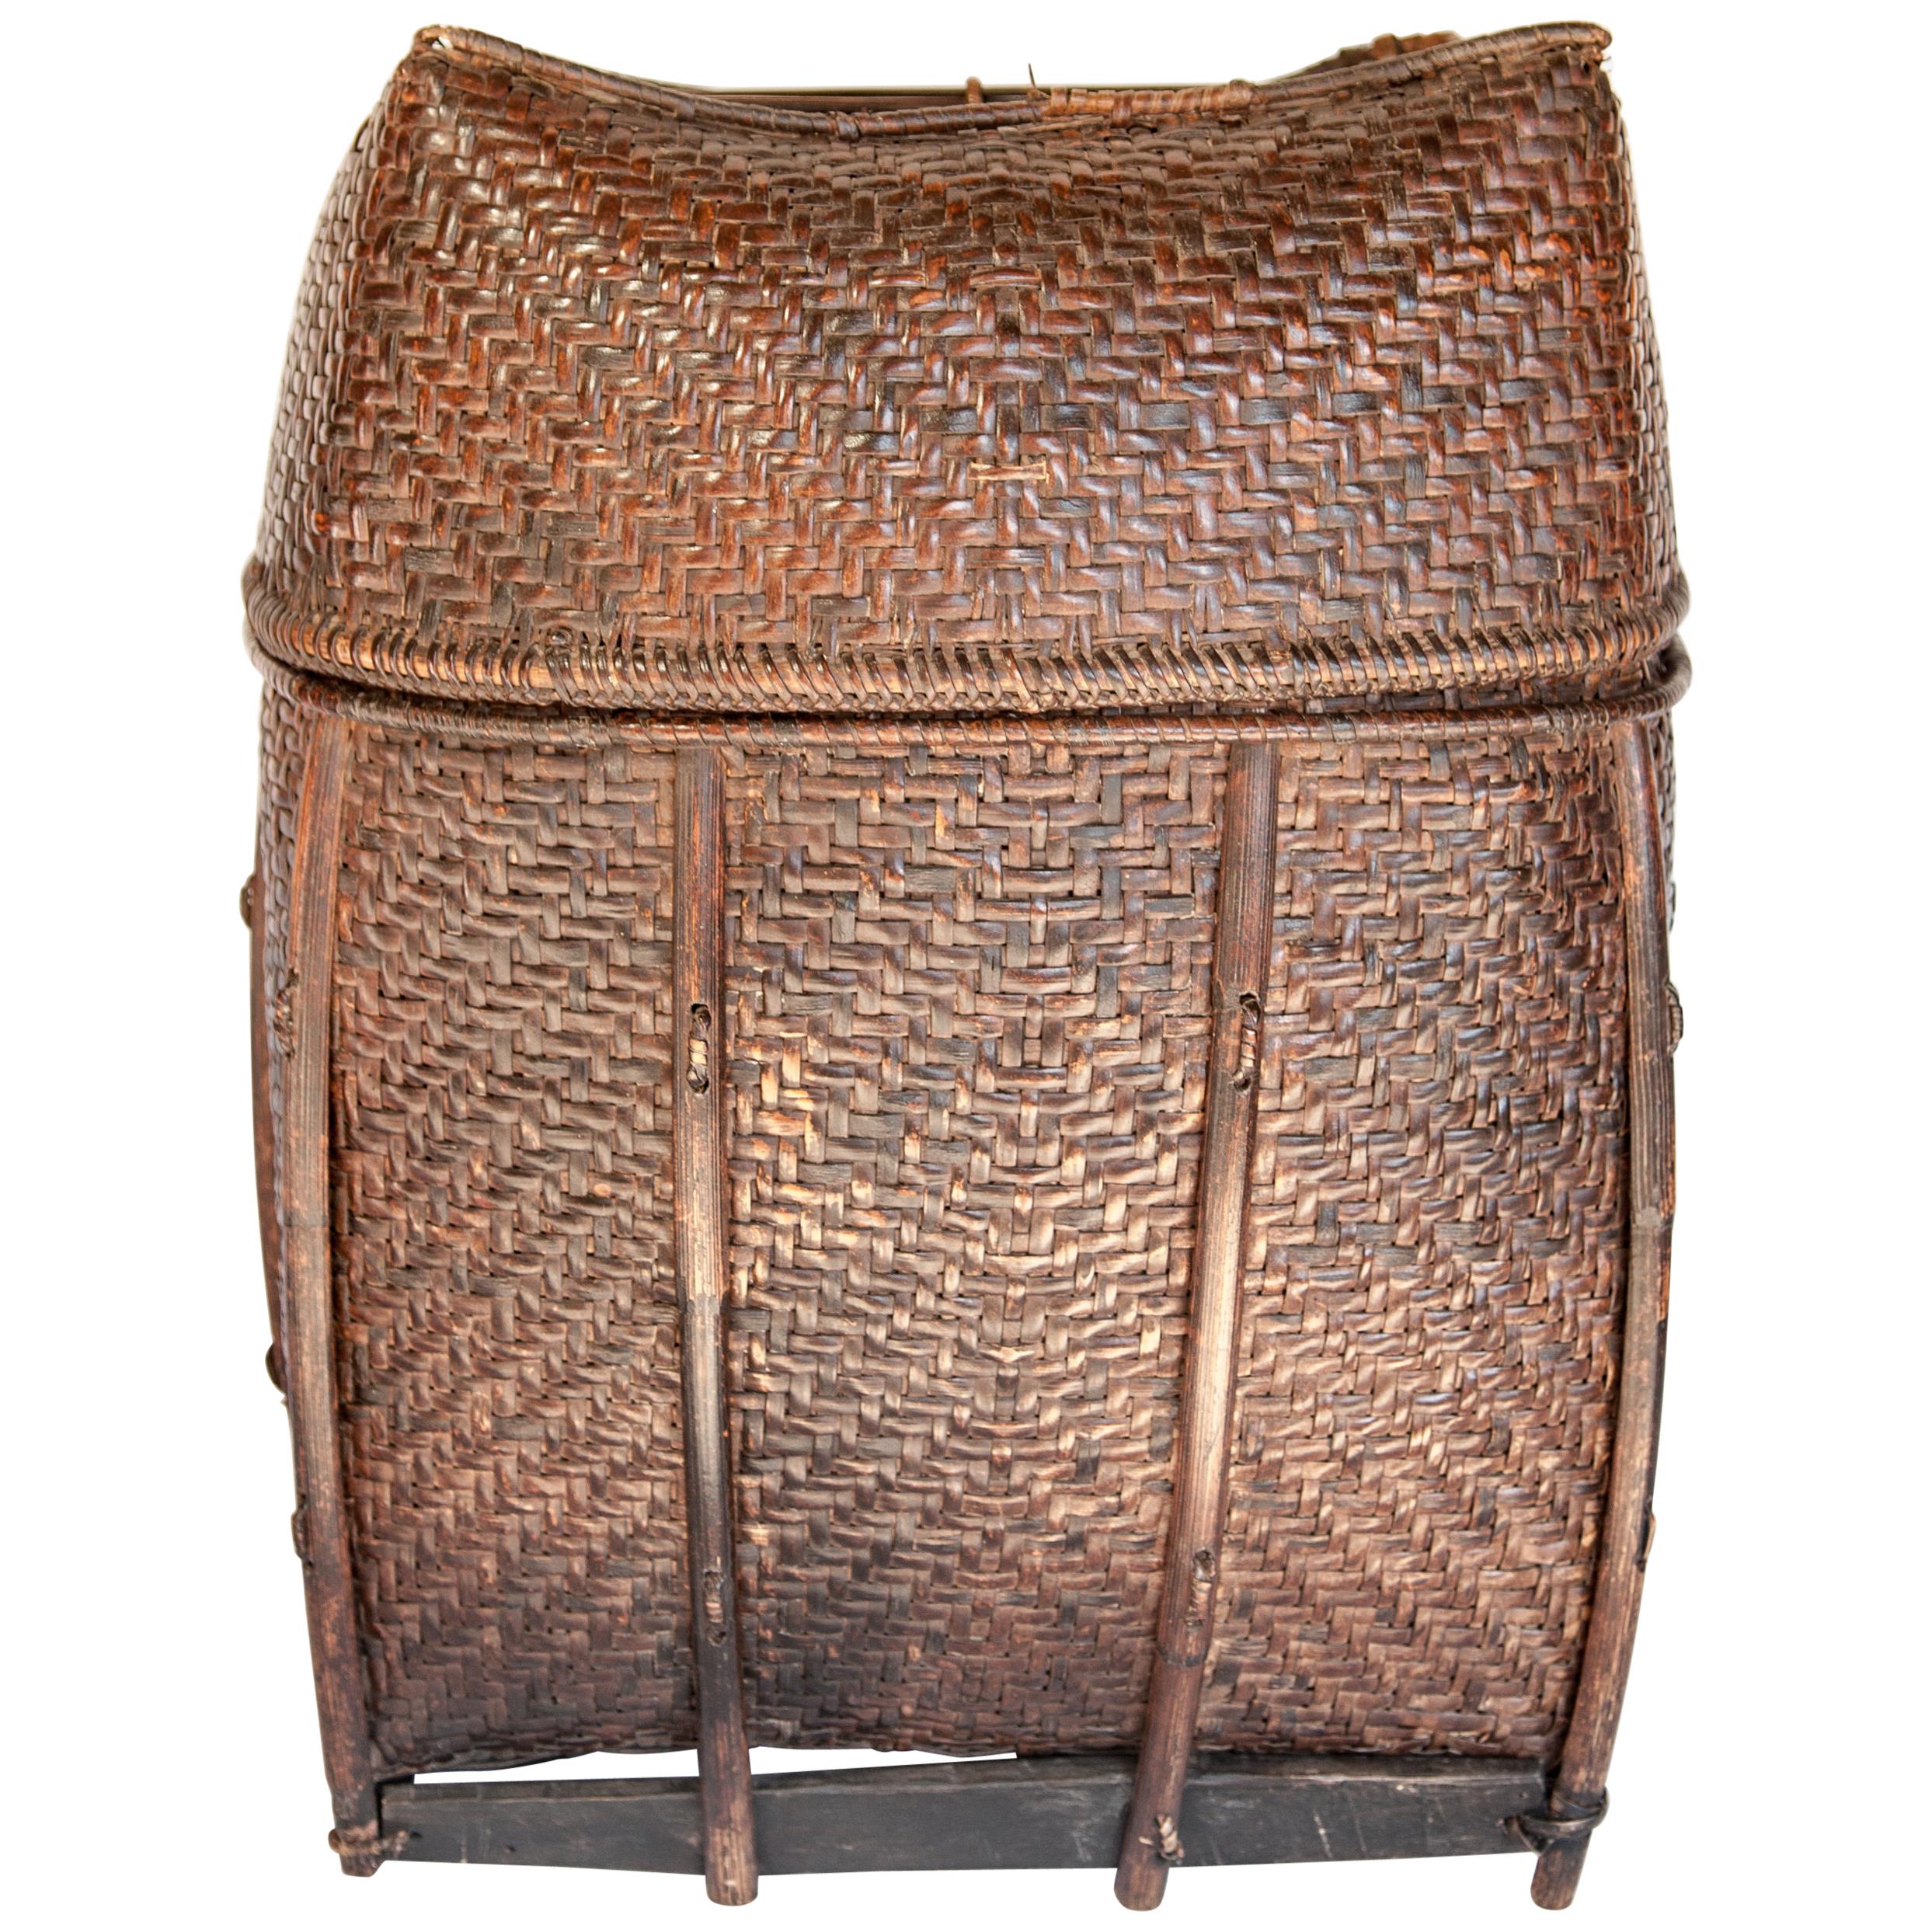 Vintage Bamboo Storage Basket from the Akha of North Thailand, Mid-20th Century